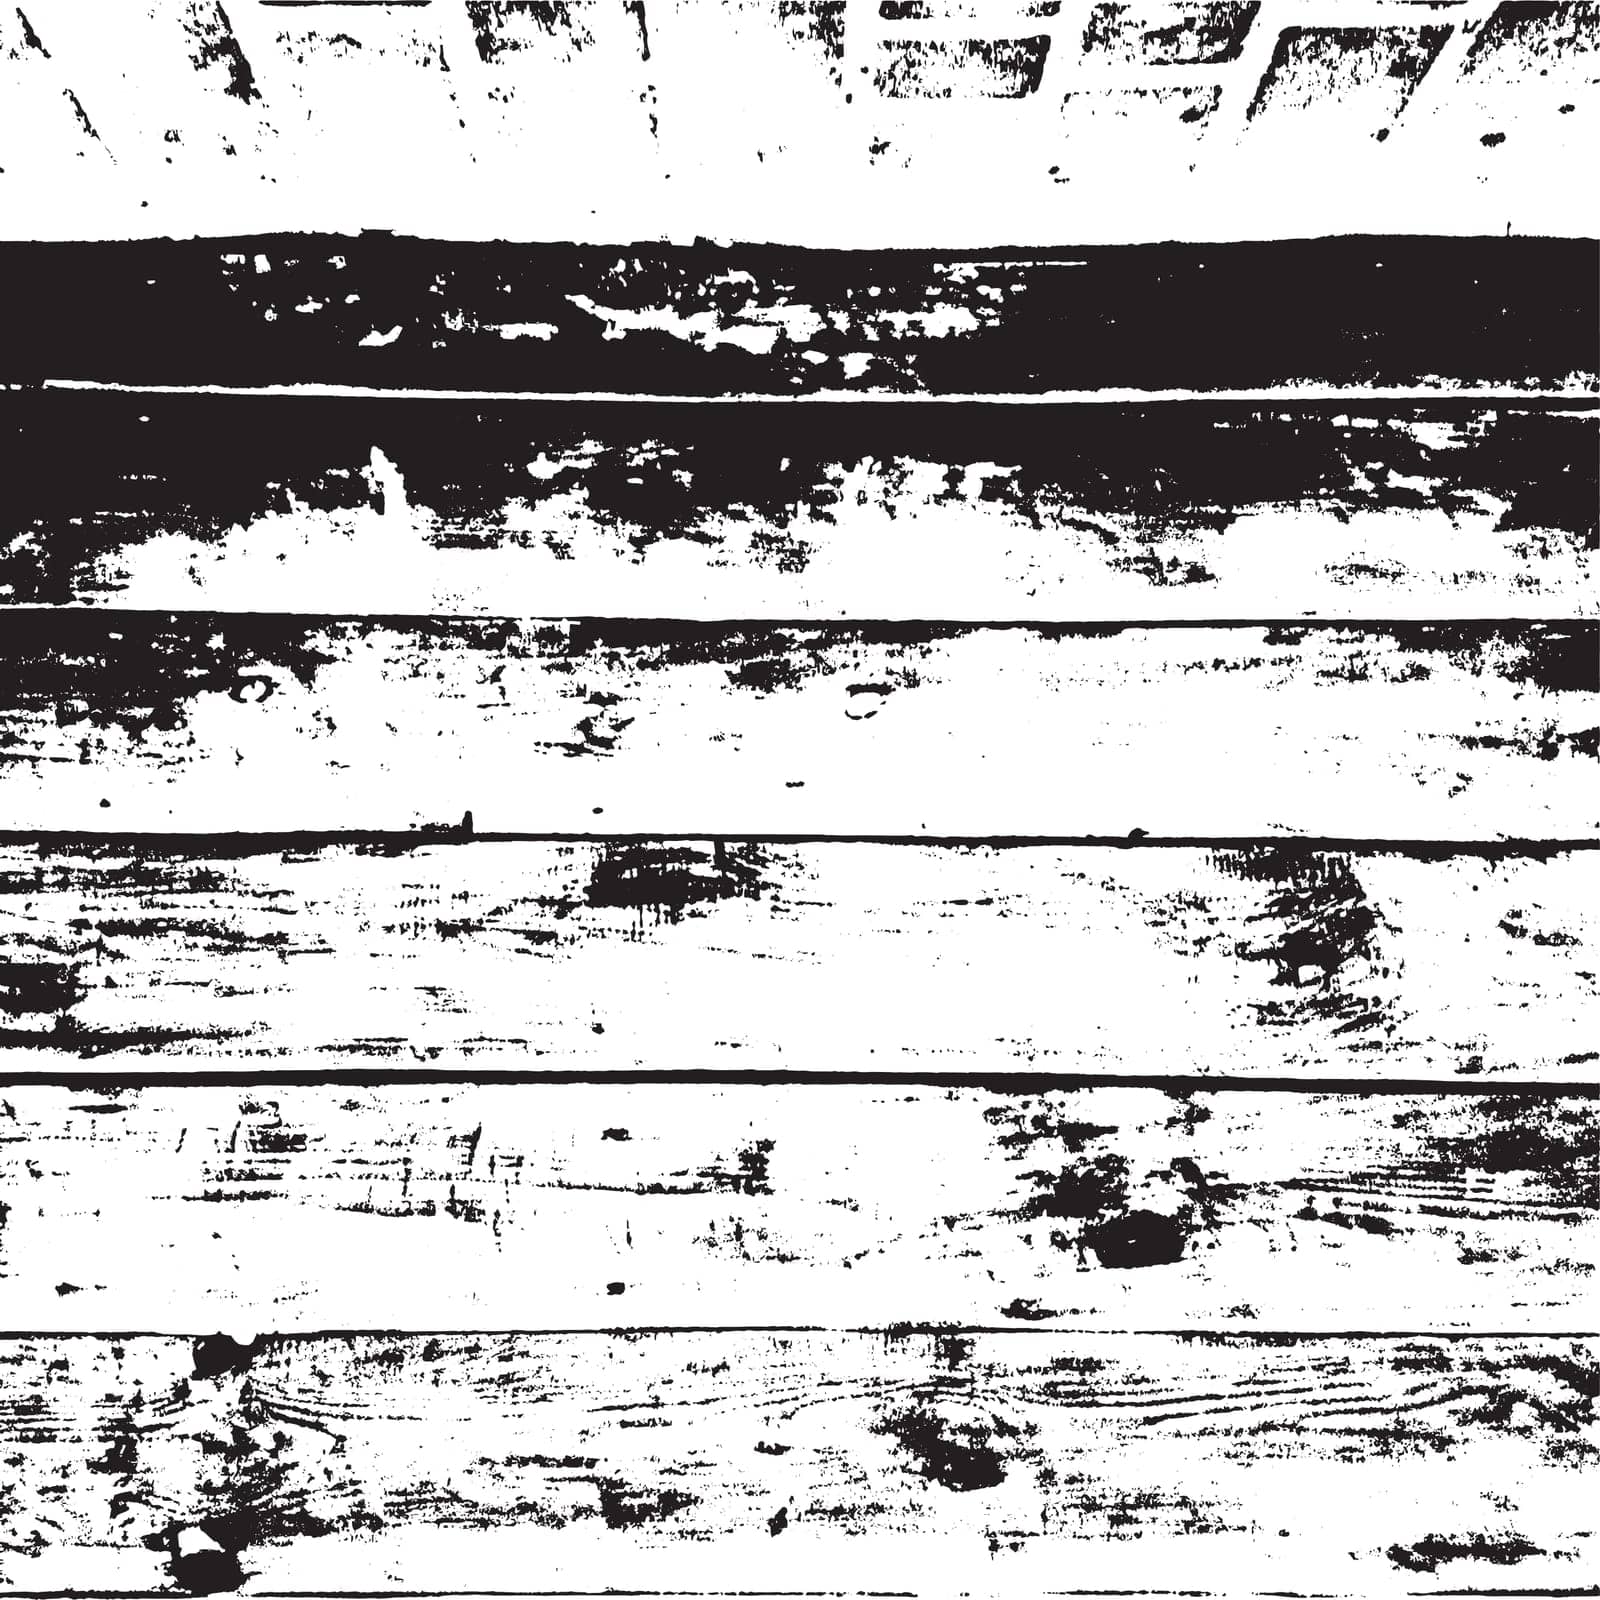 Distressed grainy wood overlay texture. Grunge wooden planks messy background. Dirty rustic empty cover template. Rural fence wall backdrop. Weathered aging design element. EPS10 vector.